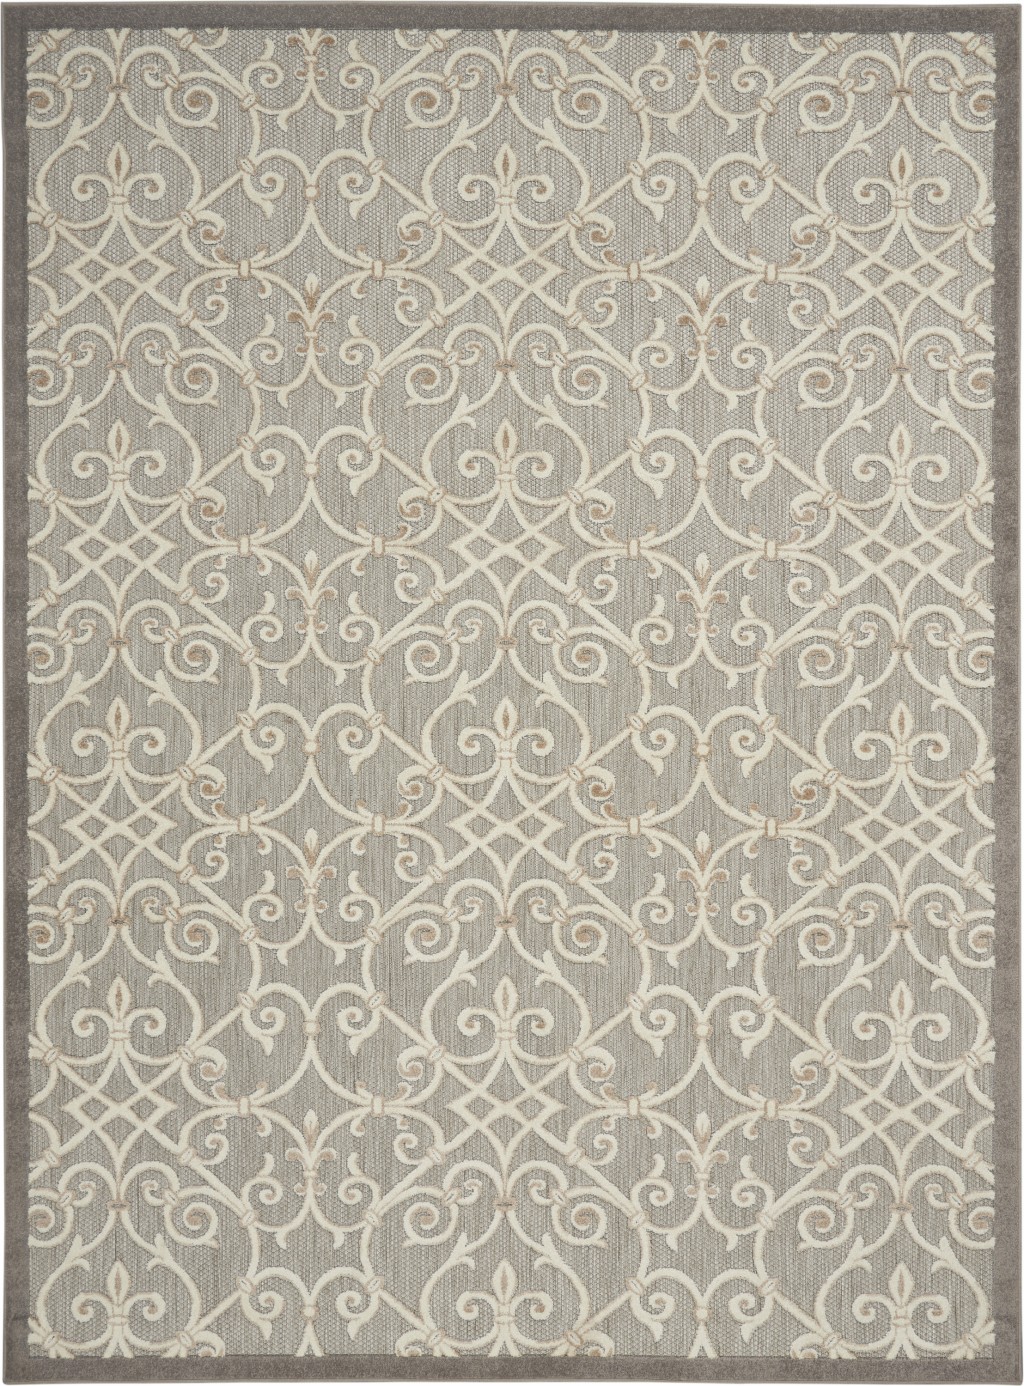 8' X 11' Gray And Ivory Floral Indoor Outdoor Area Rug-385053-1